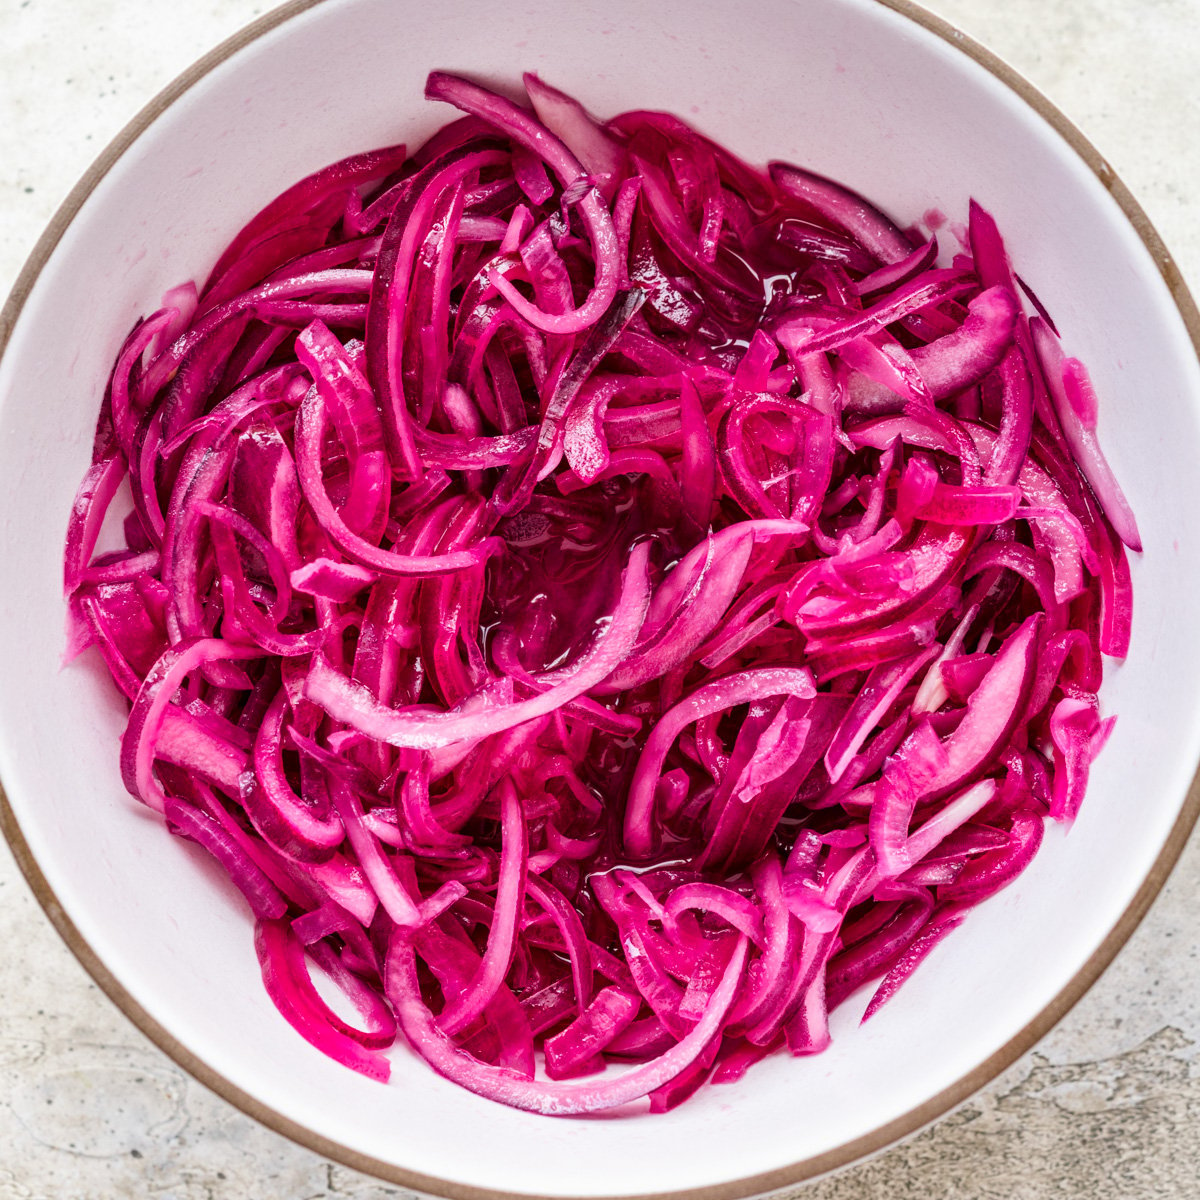 https://www.crowdedkitchen.com/wp-content/uploads/2022/02/Quick-pickled-red-onion-6.jpg